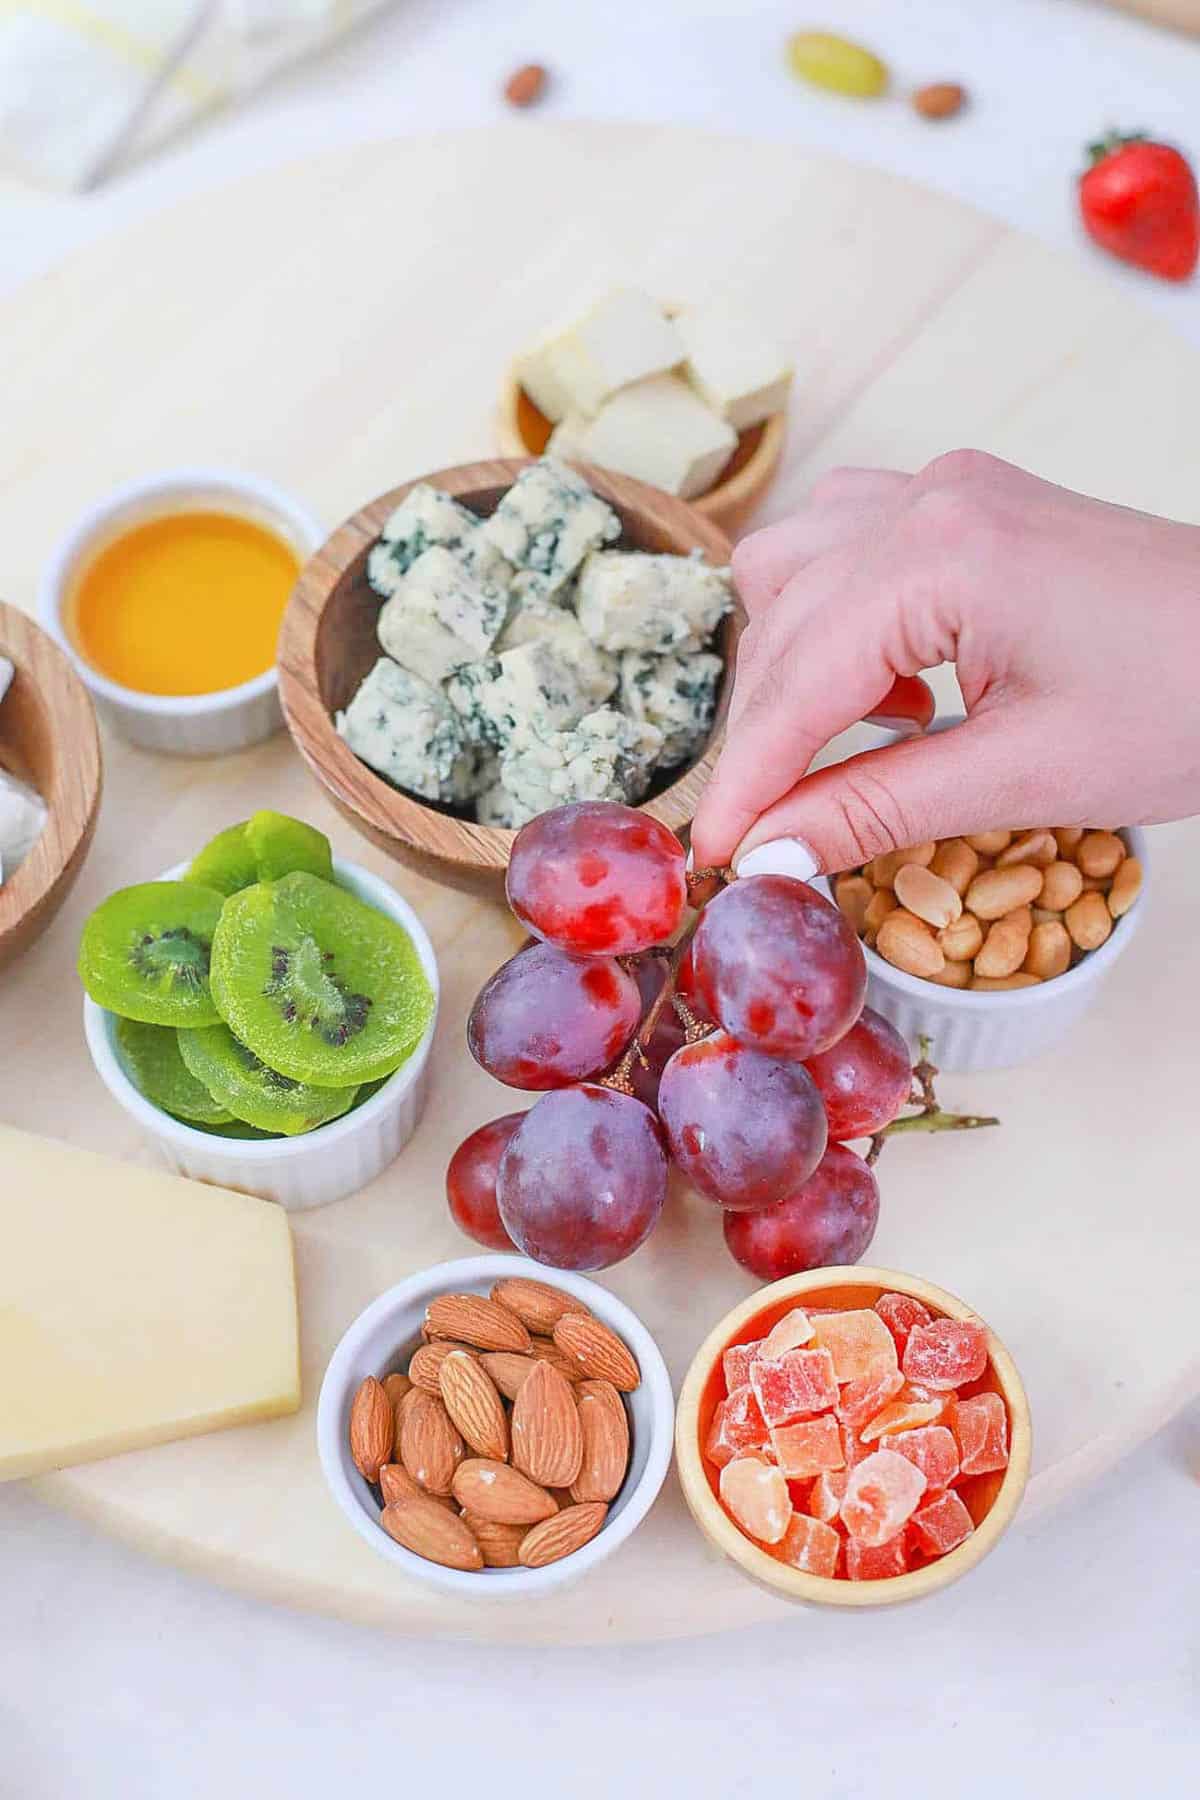 Hand holding grapes above a veggie charcuterie board.